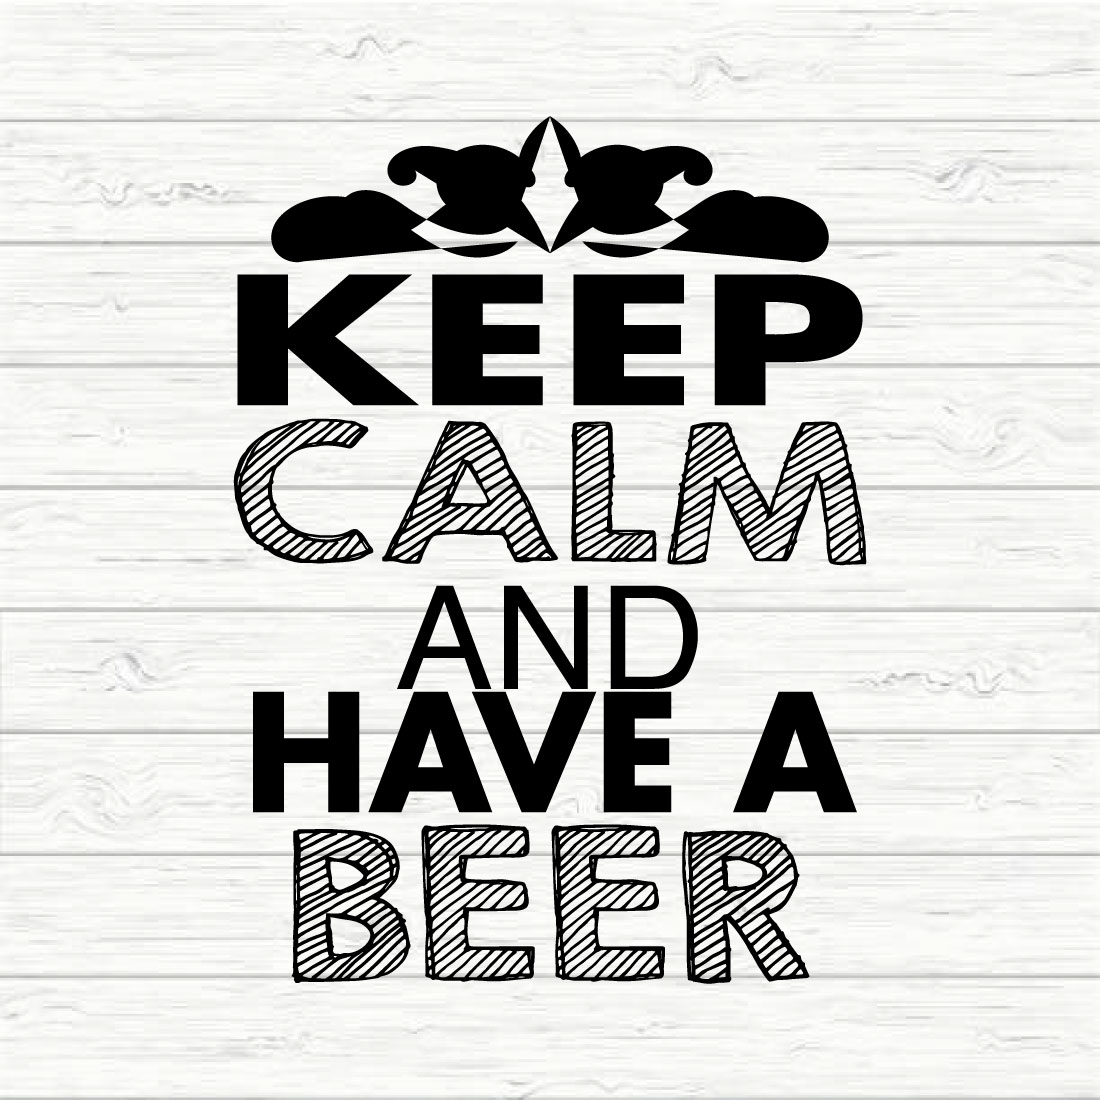 Keep Calm And Have A Beer preview image.